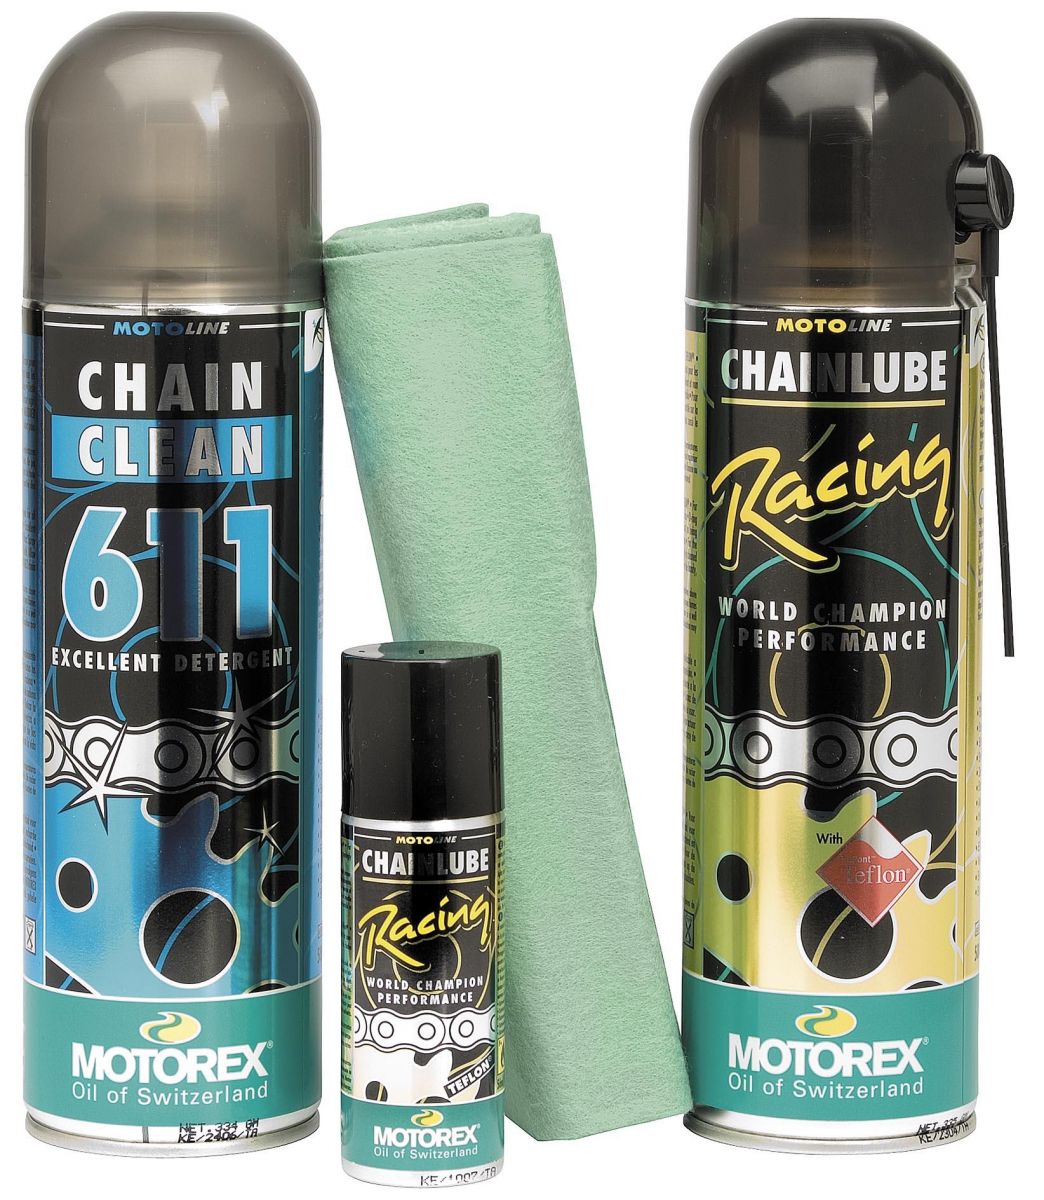 Motorex chain cleaning and lube kit